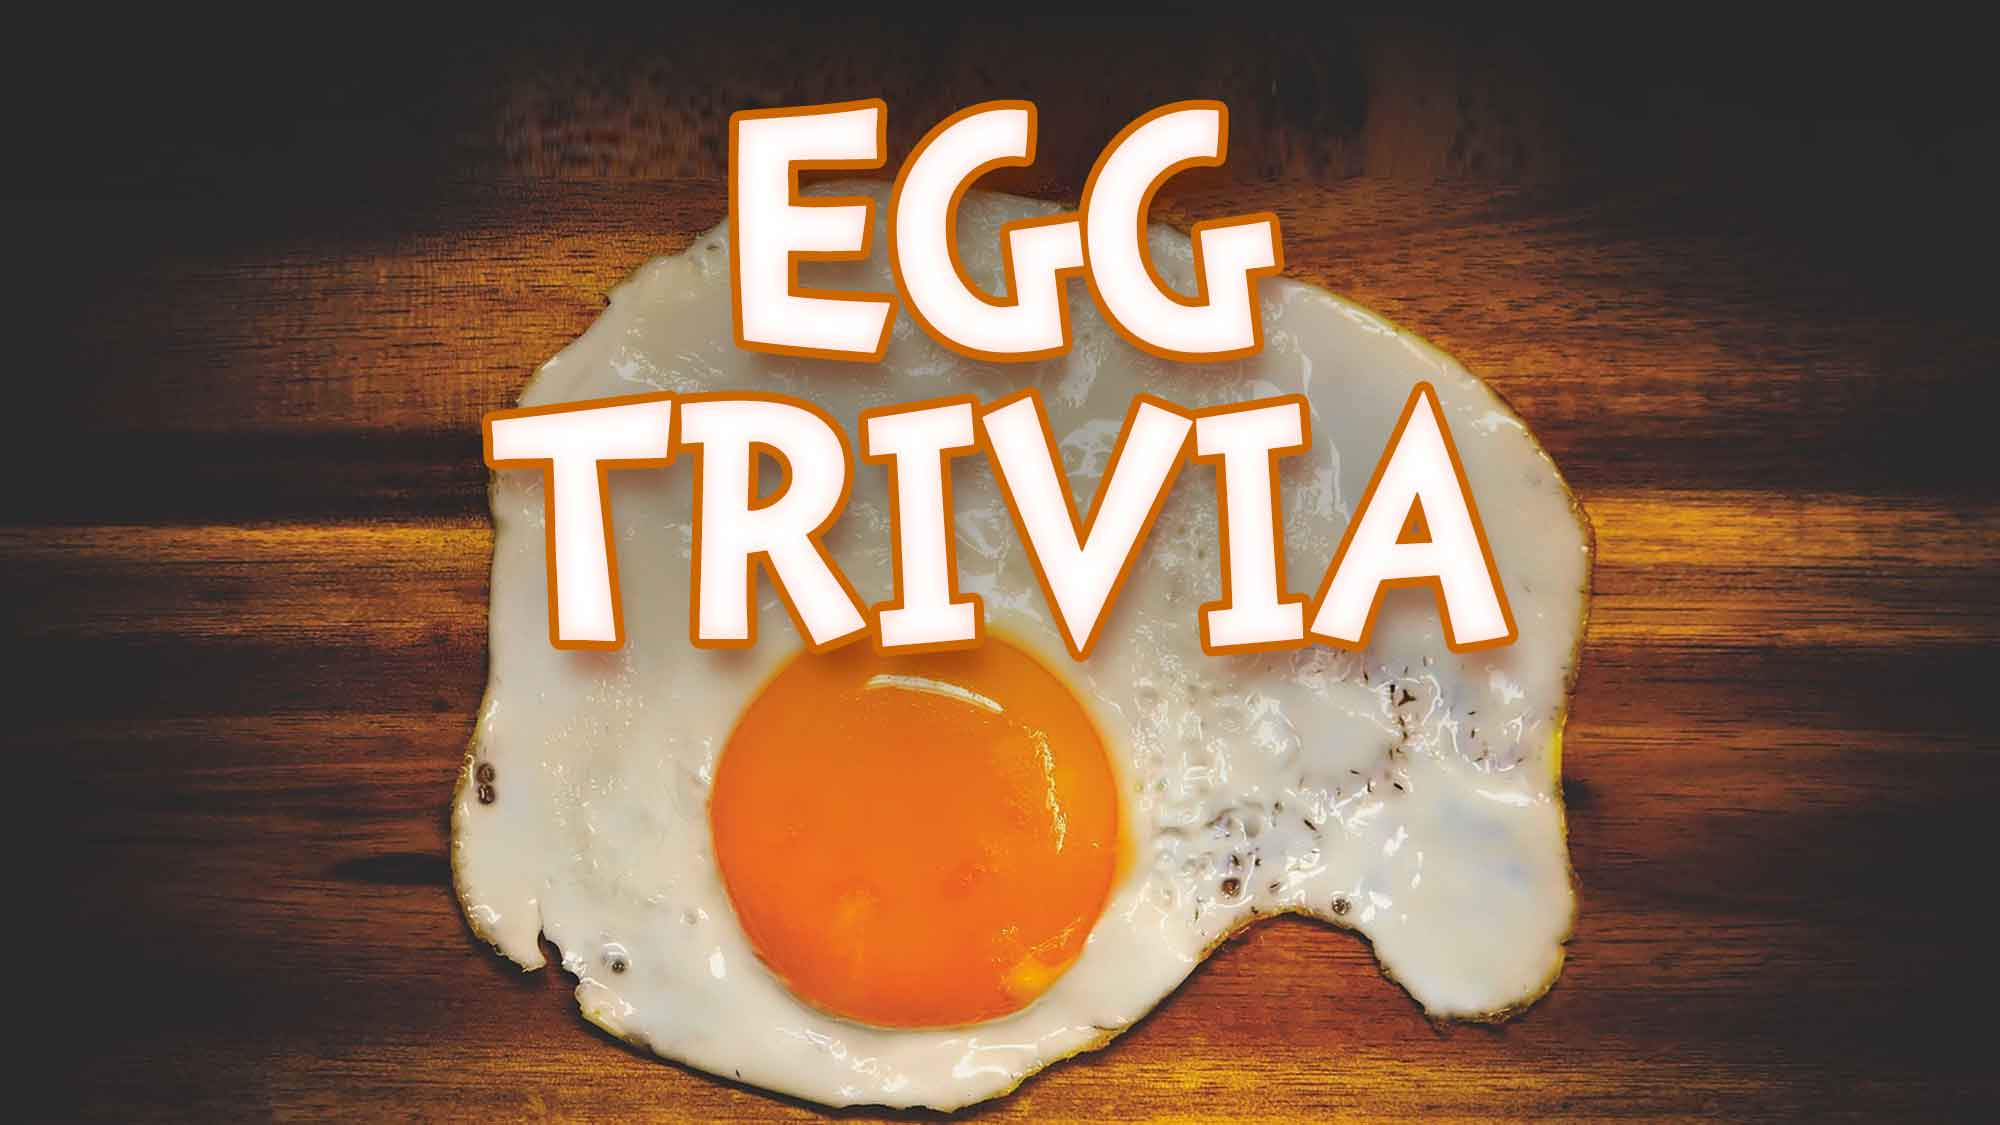 10 Things You Probably Didn't Know About Eggs - Unbelievable Egg Trivia Facts